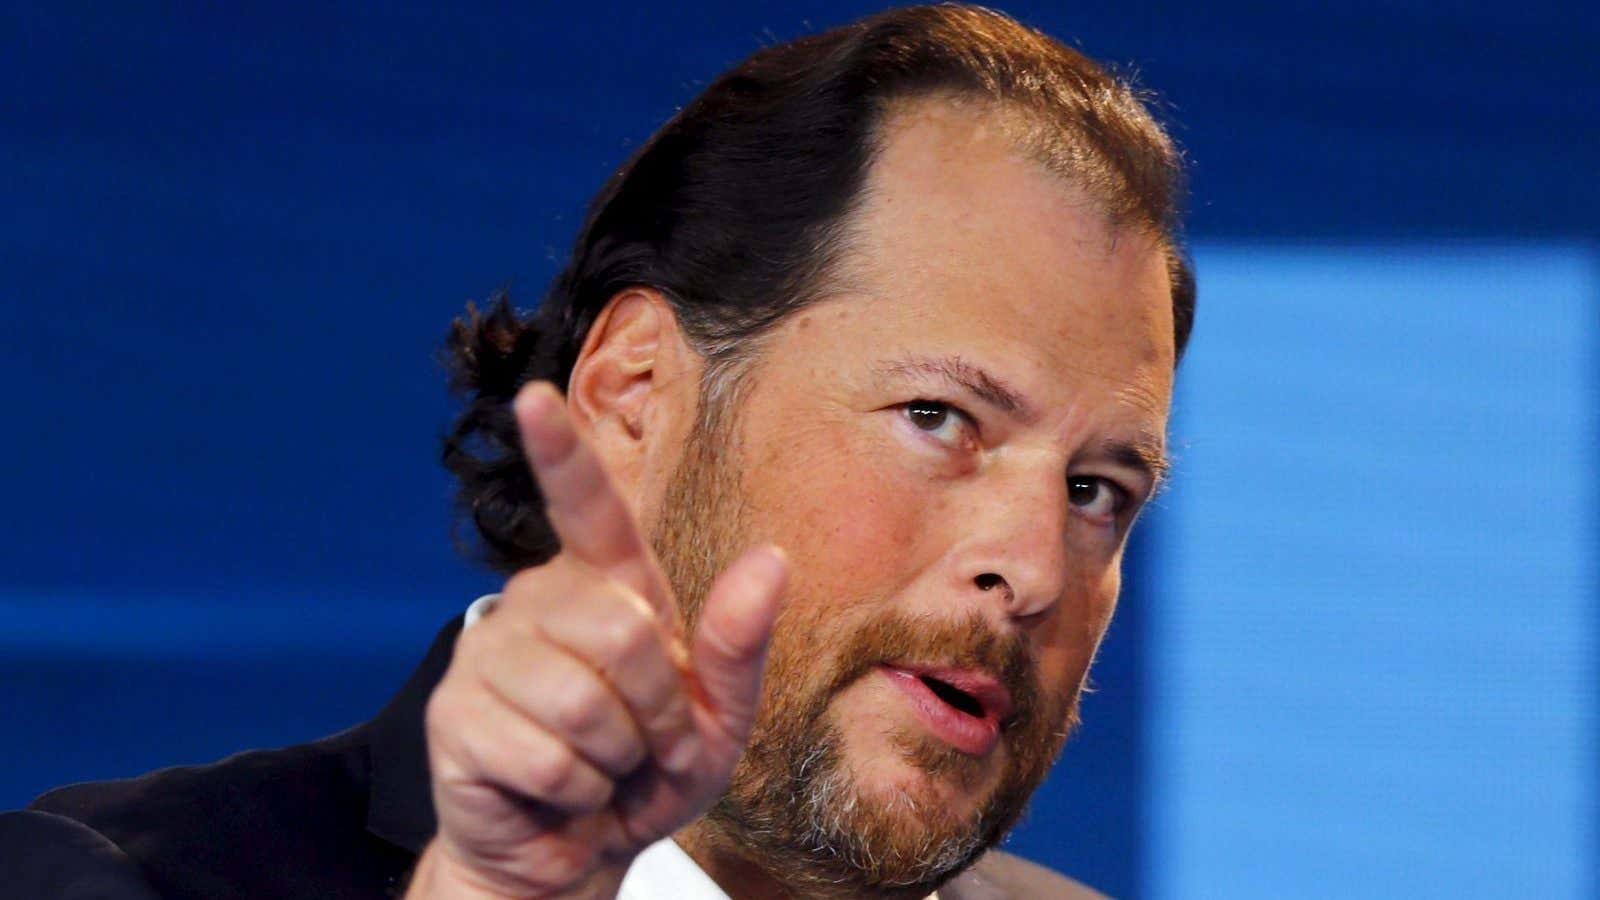 Marc Benioff, CEO of Salesforce, has twice spent $3 million to close a pay gap within the company.